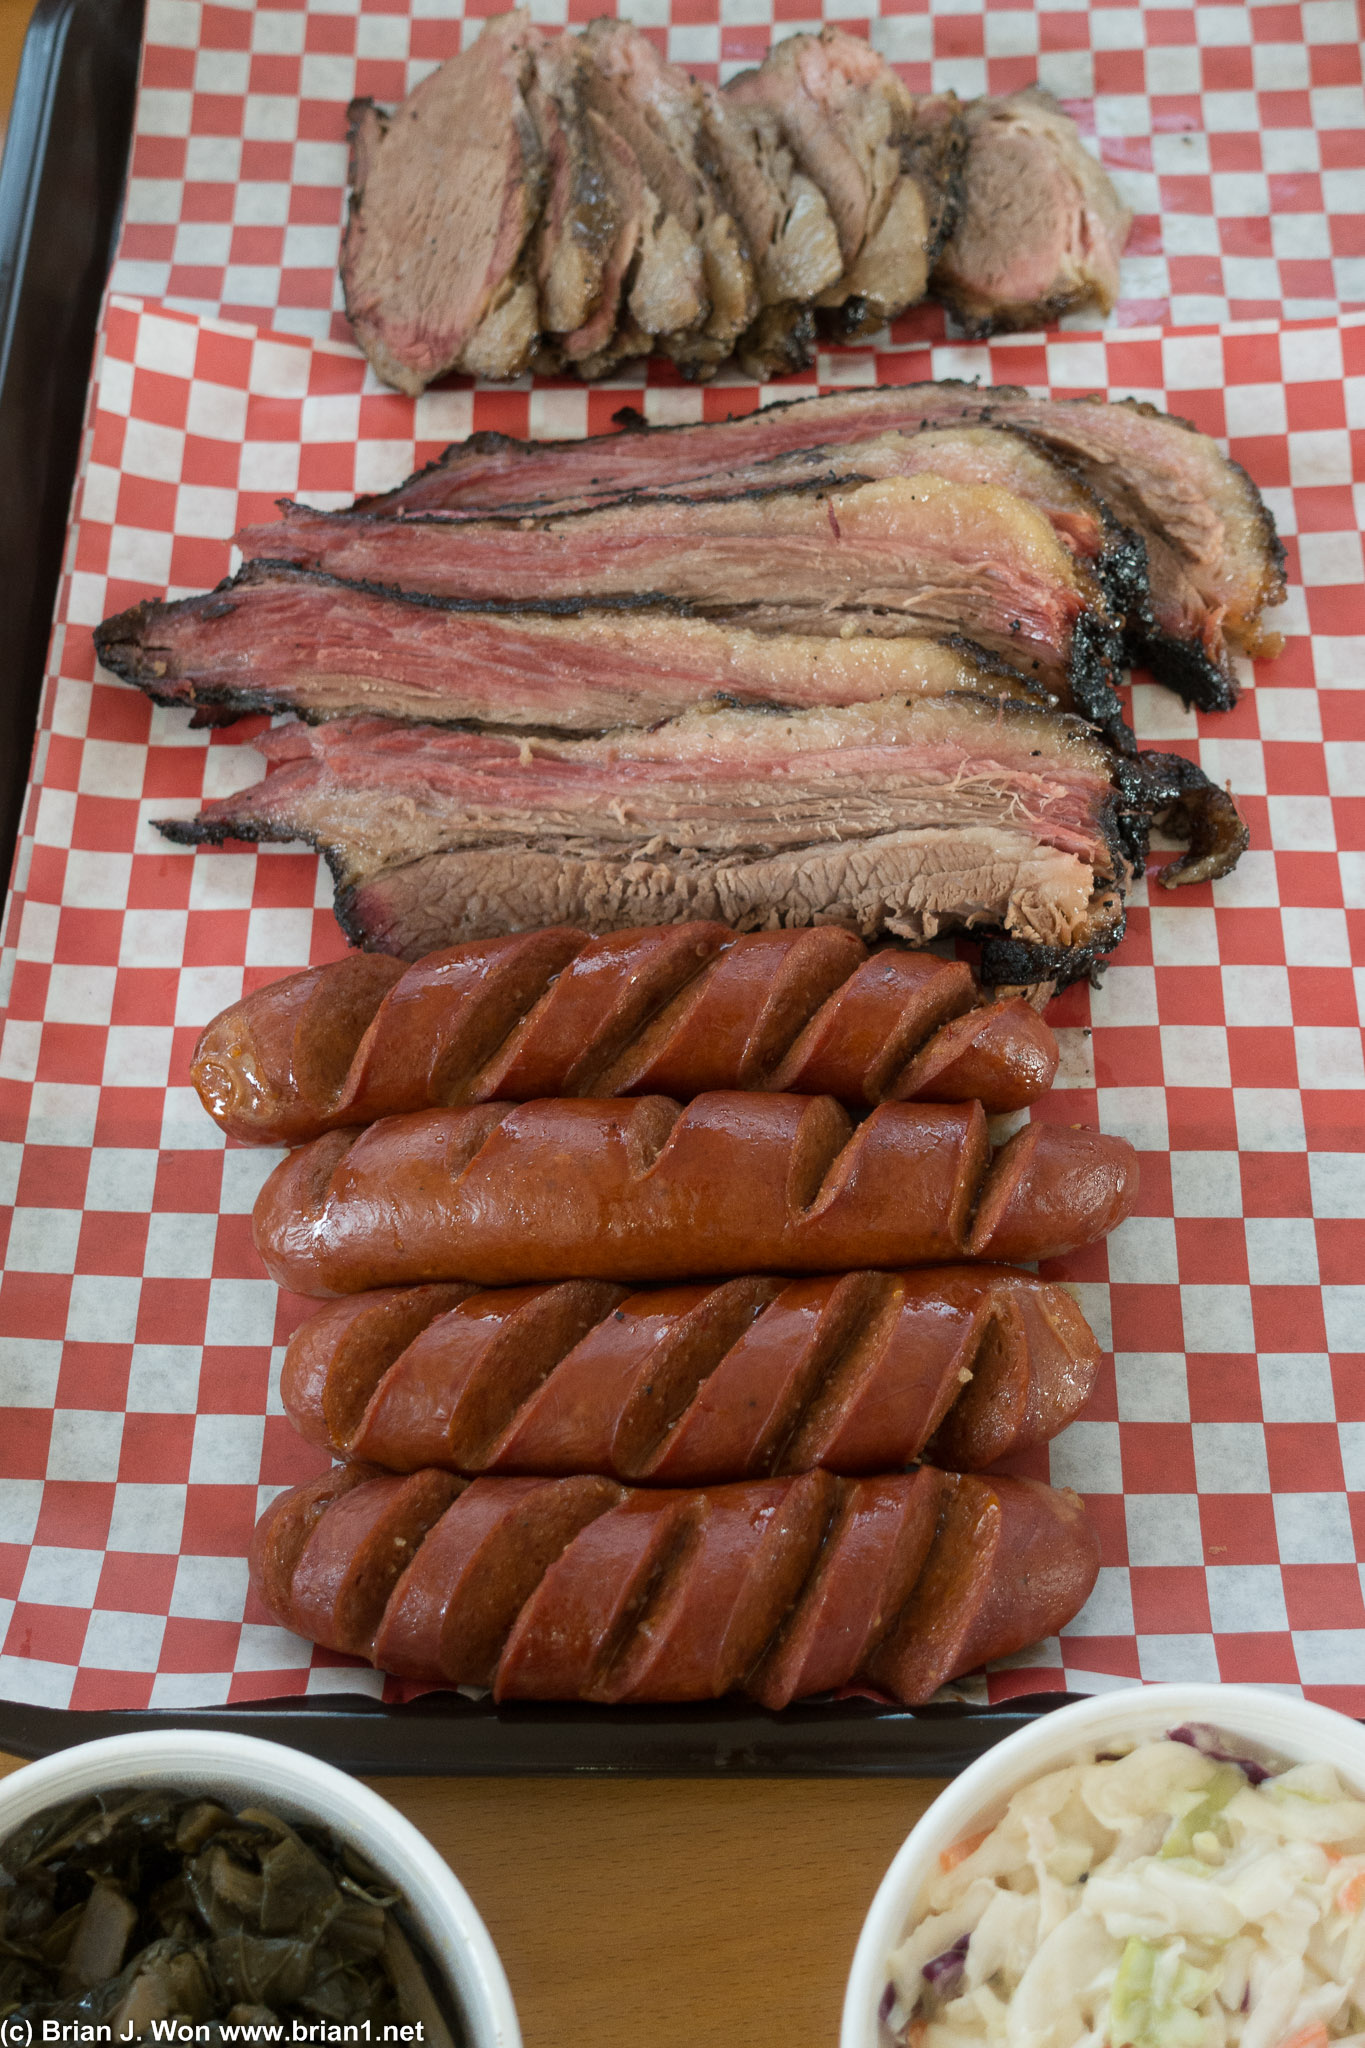 Top to bottom: tri-tip, beef brisket, hot links (best of the three, tho everything was good enough).